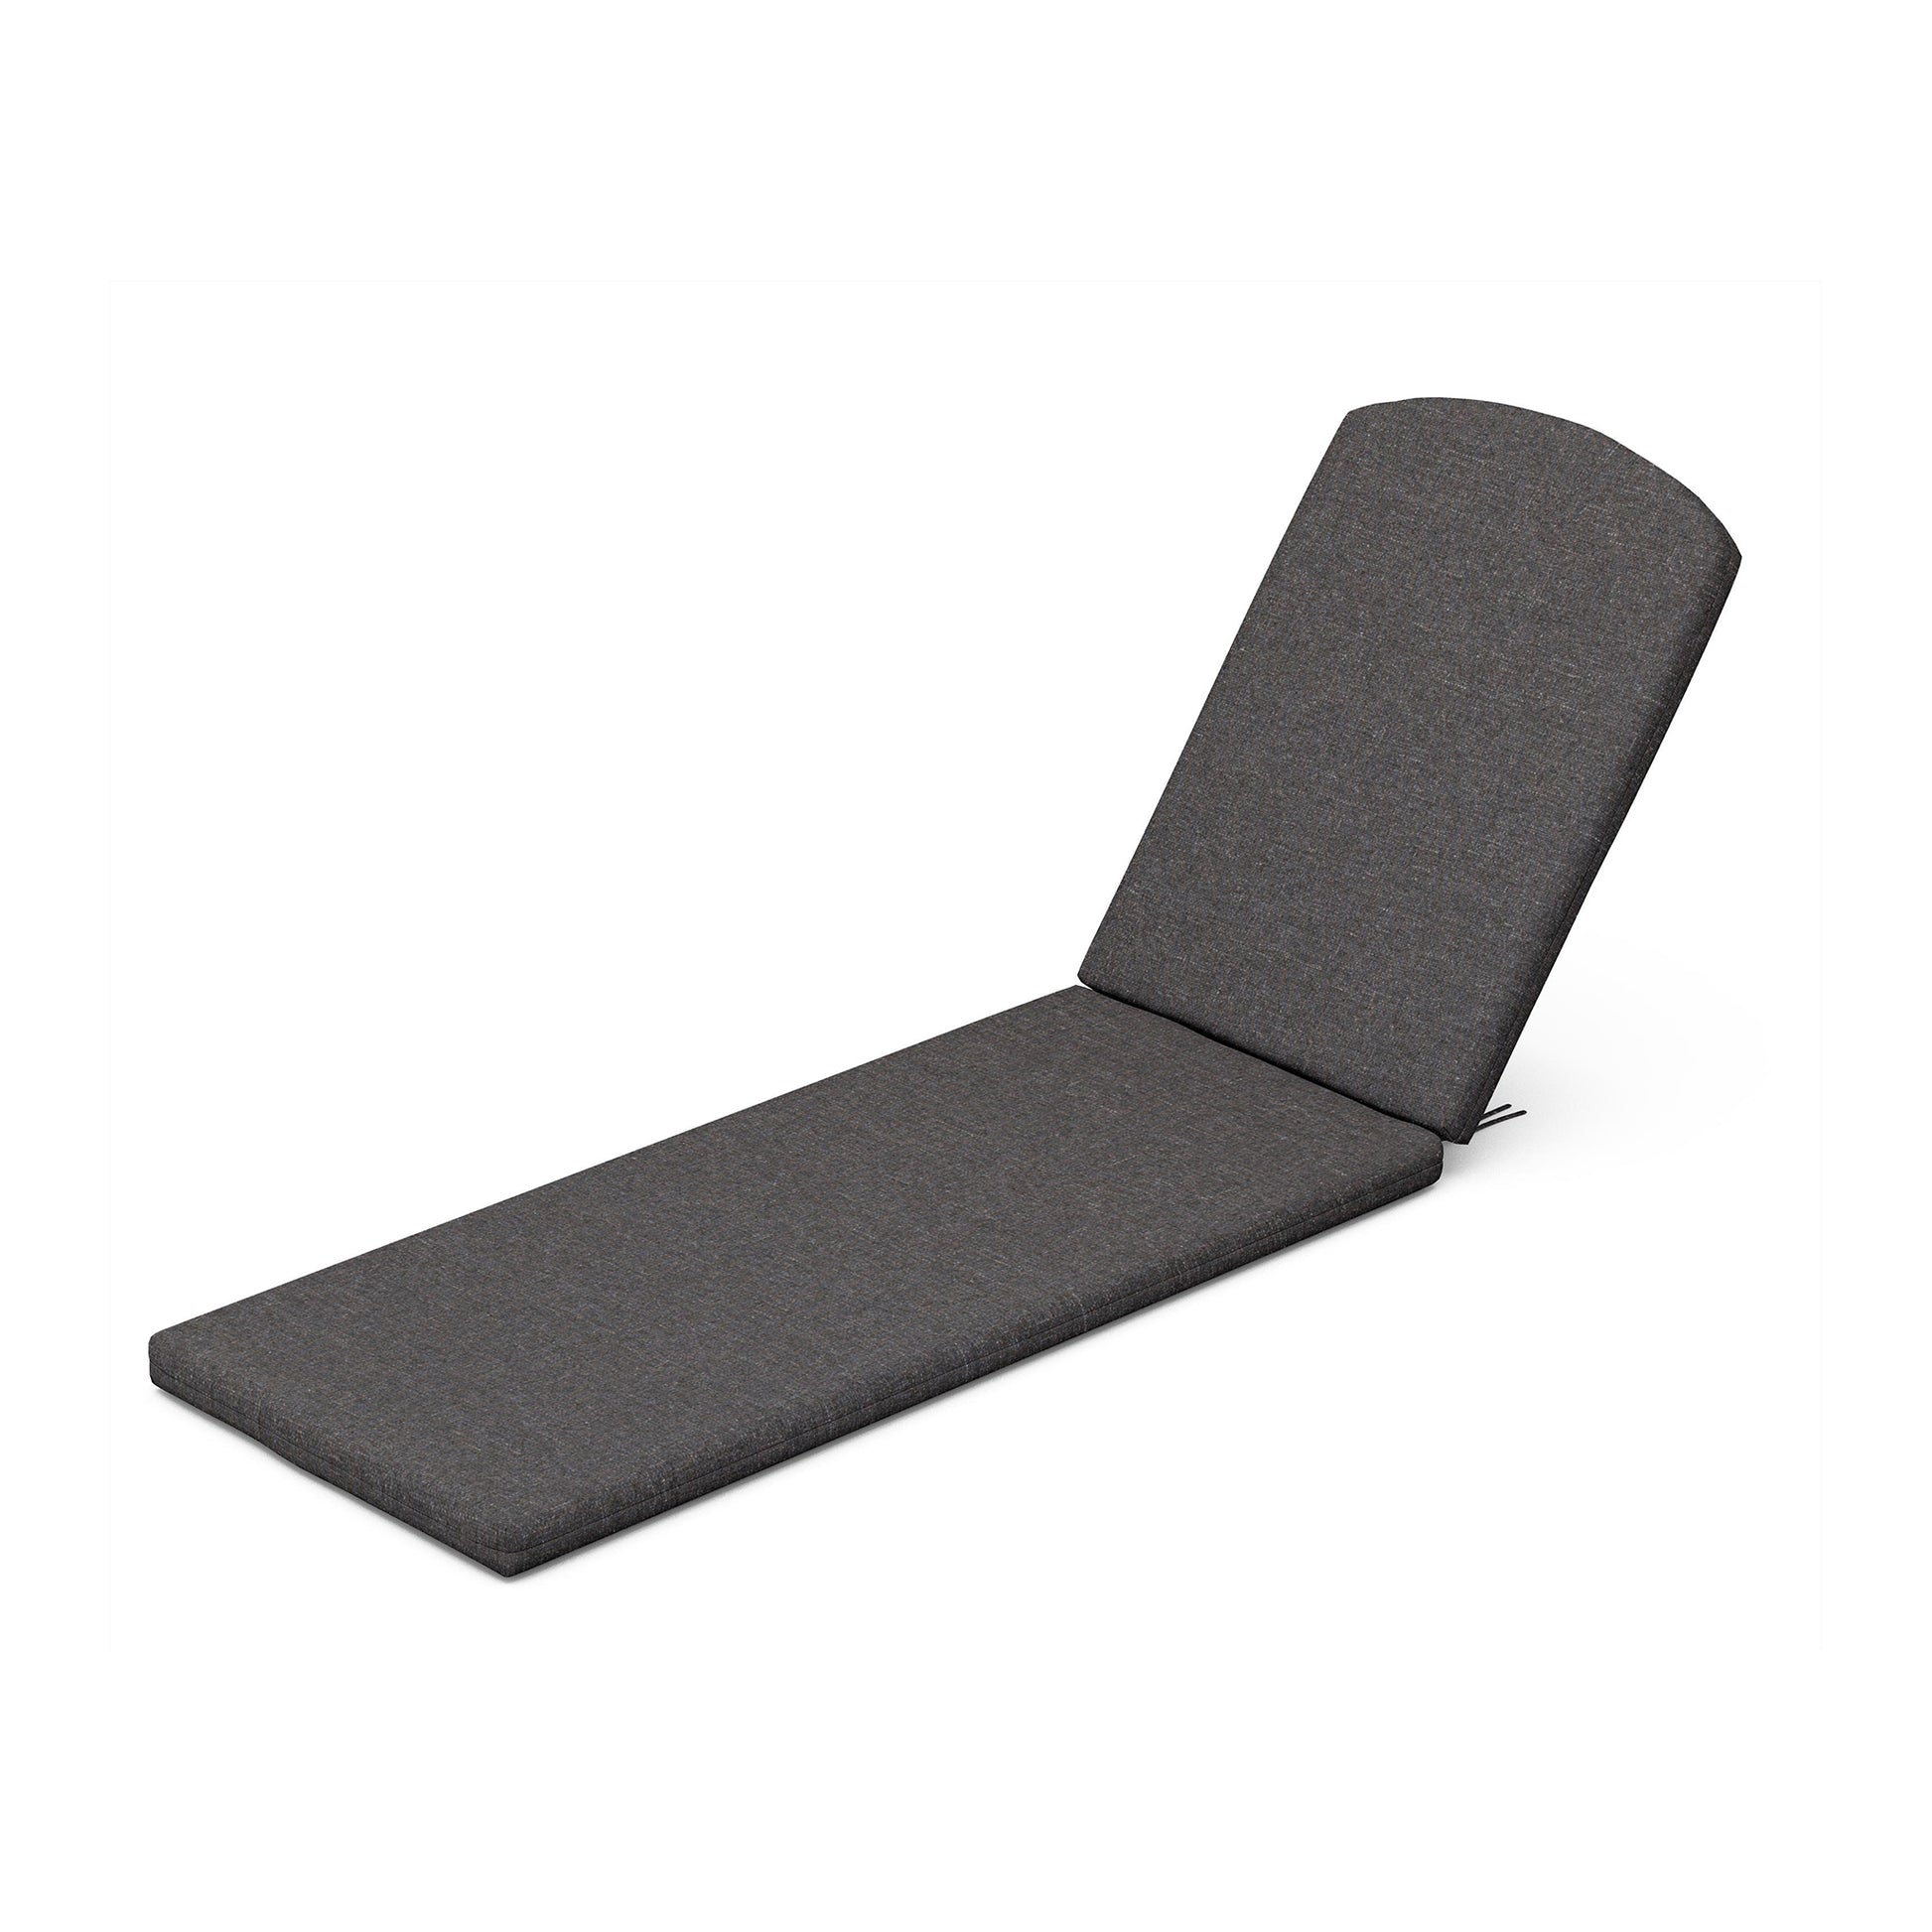 A modern gray lounge chair with a minimalistic design, featuring a flat lying surface and an angled headrest, equipped with weather-resistant upholstery fabric, isolated on a white background by POLYWOOD's XPWF0004 - Full Seat Cushion.